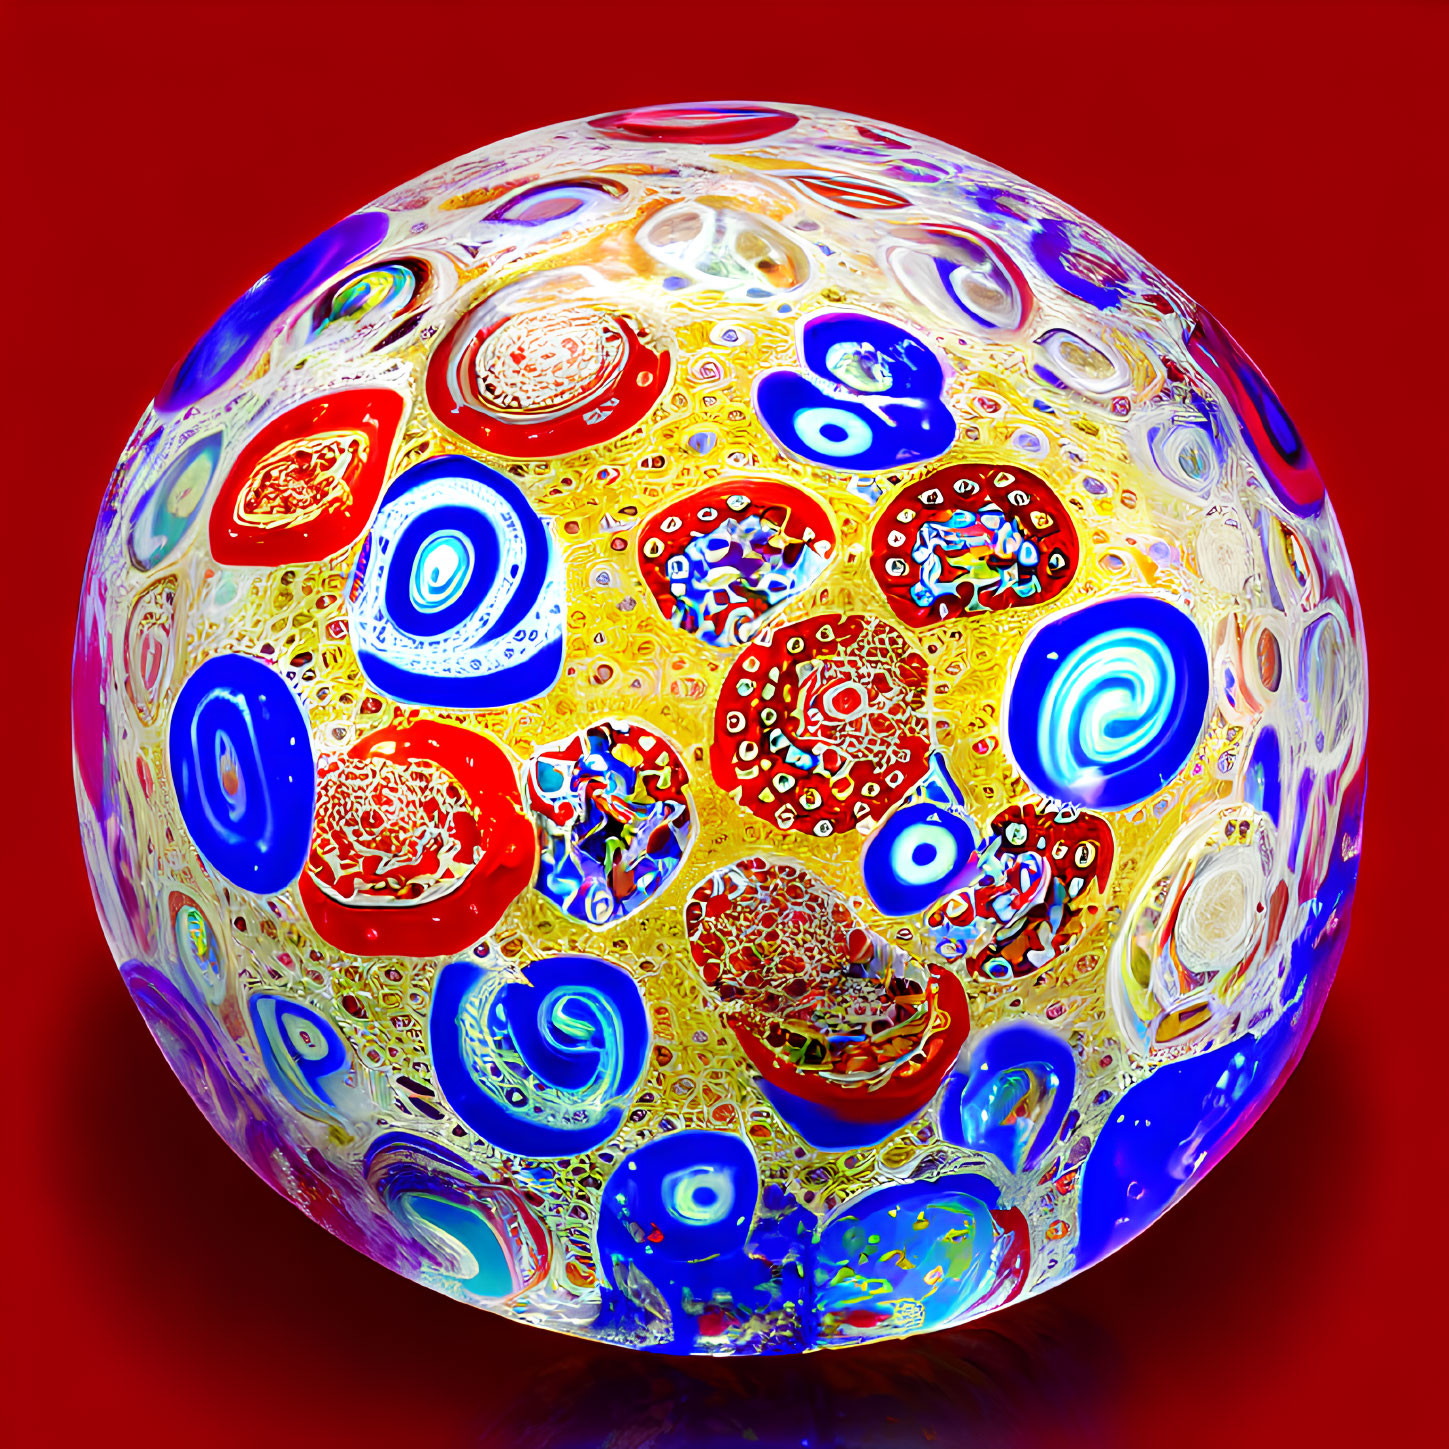 Colorful Abstract Sphere with Swirling Red, Blue, Yellow, and White Patterns